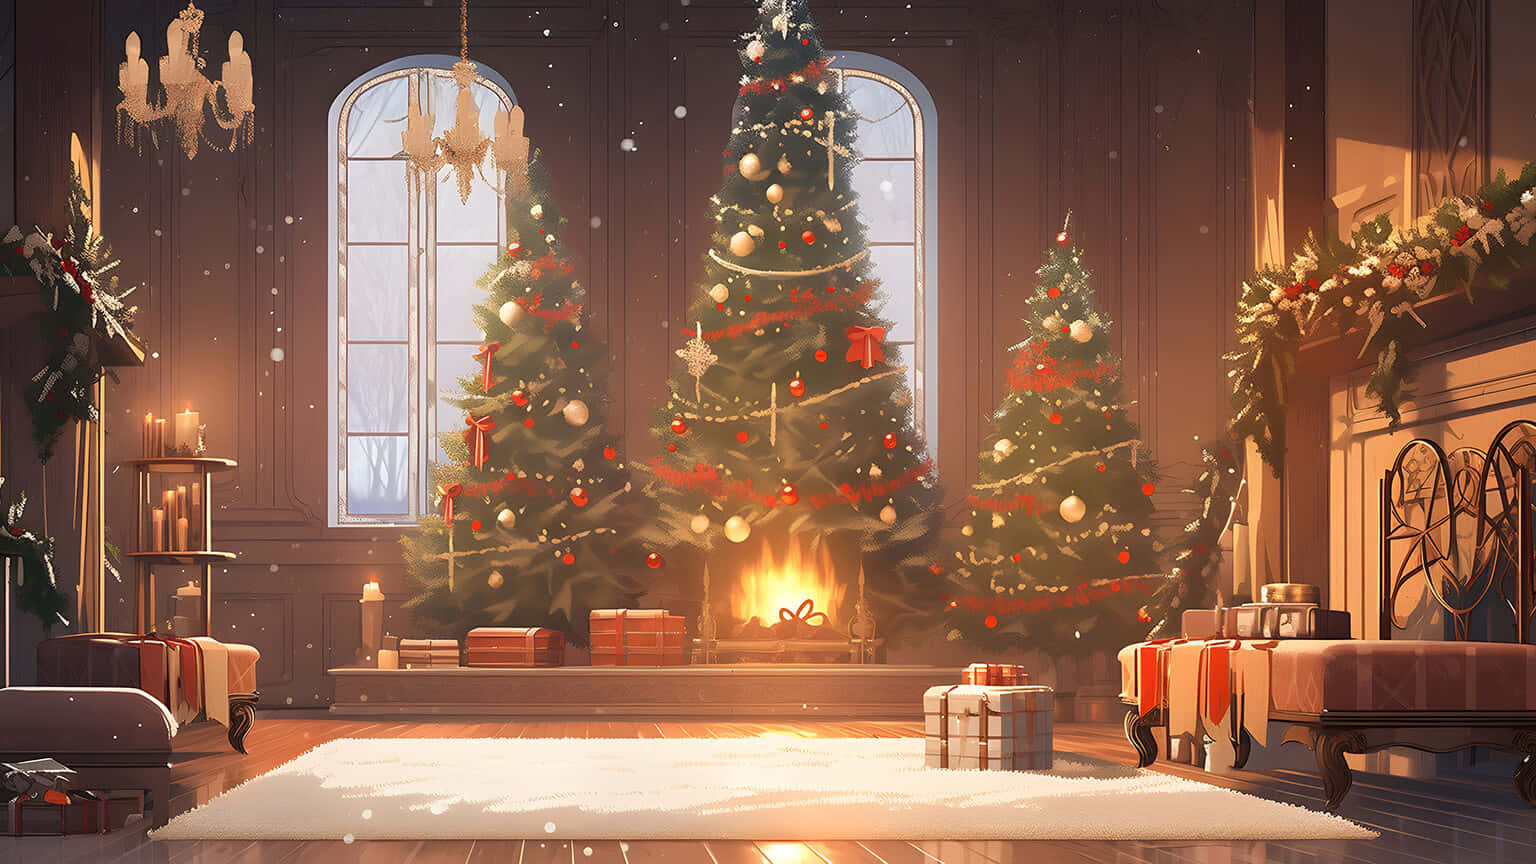 Cozy_ Christmas_ Room_with_ Fireplace_and_ Tree.jpg Wallpaper